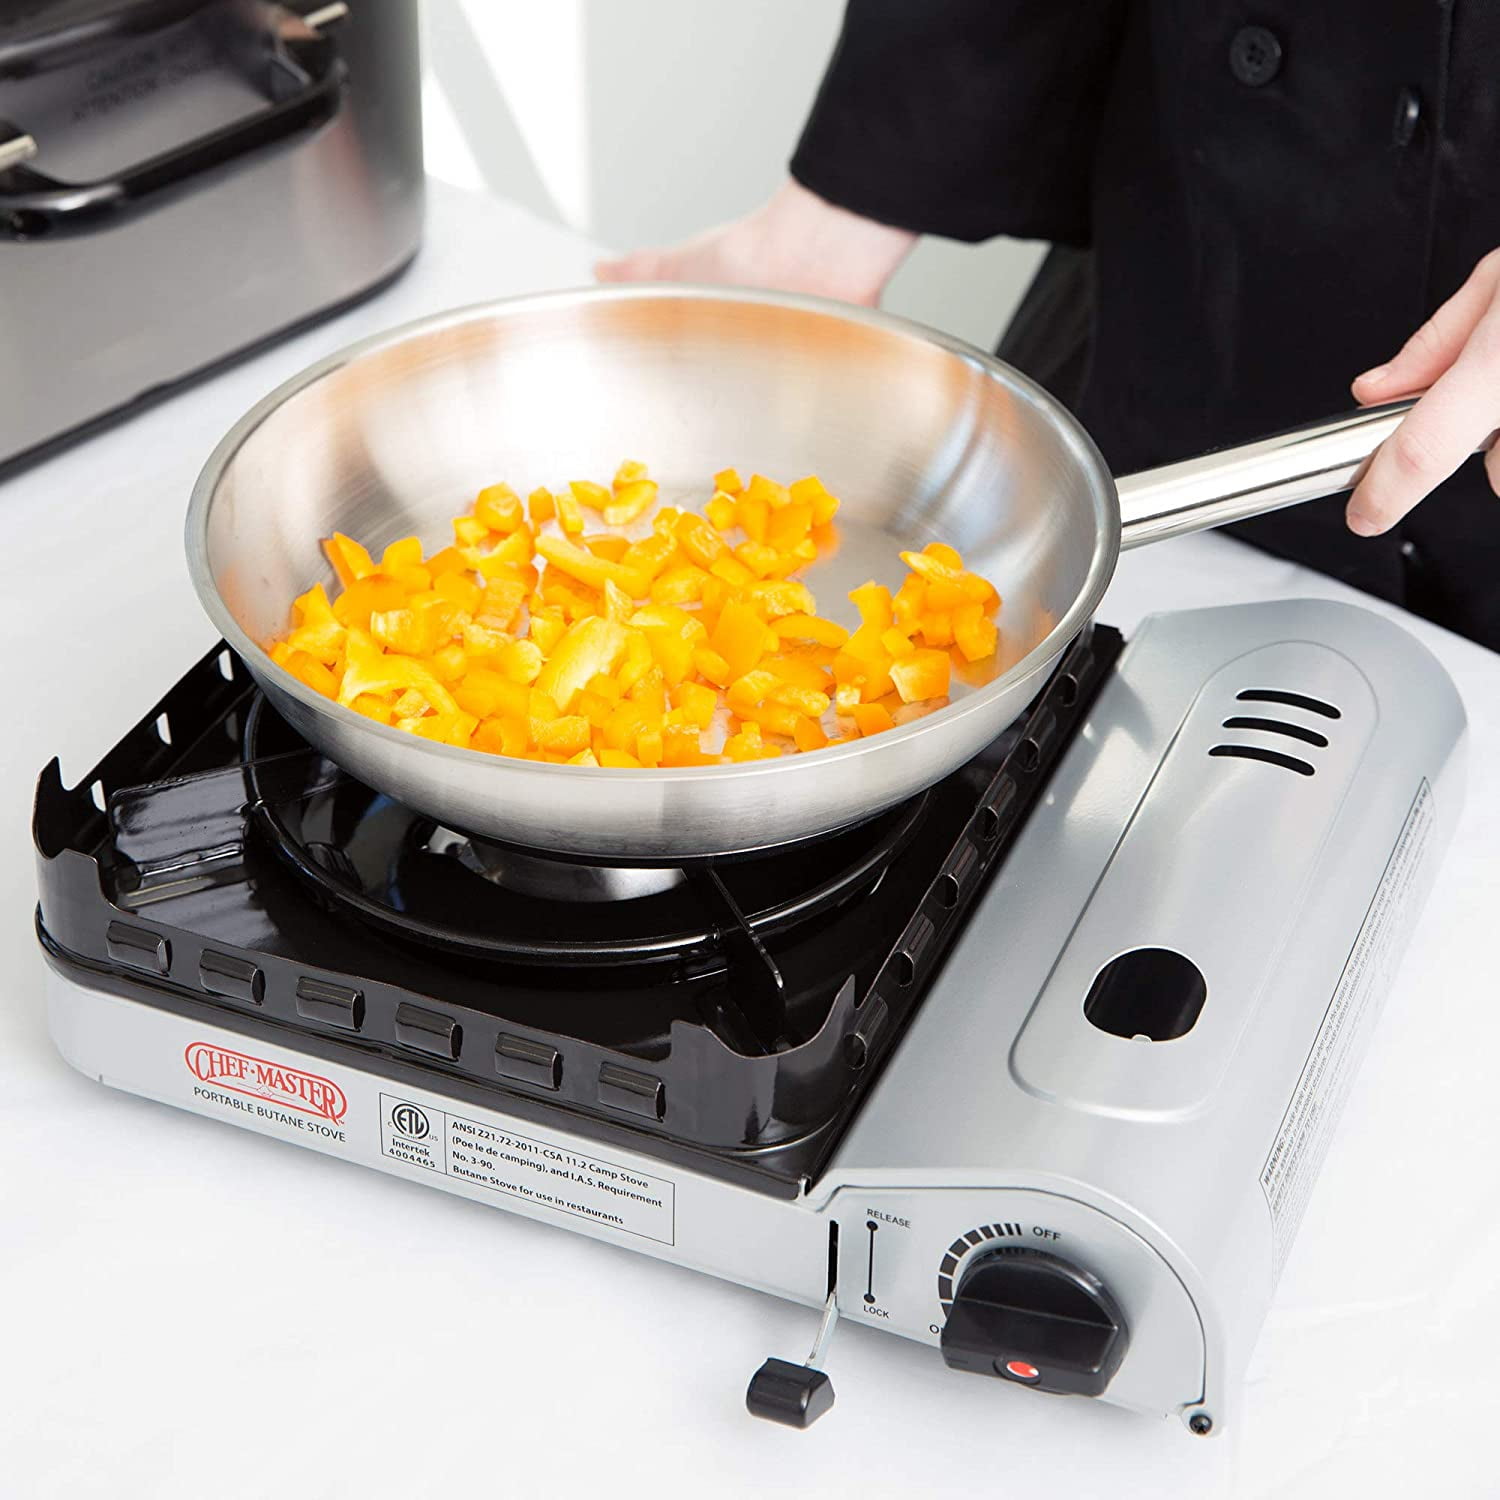 Chef-Master Chef-Master Butane Stove, Portable, For Indoor Use In